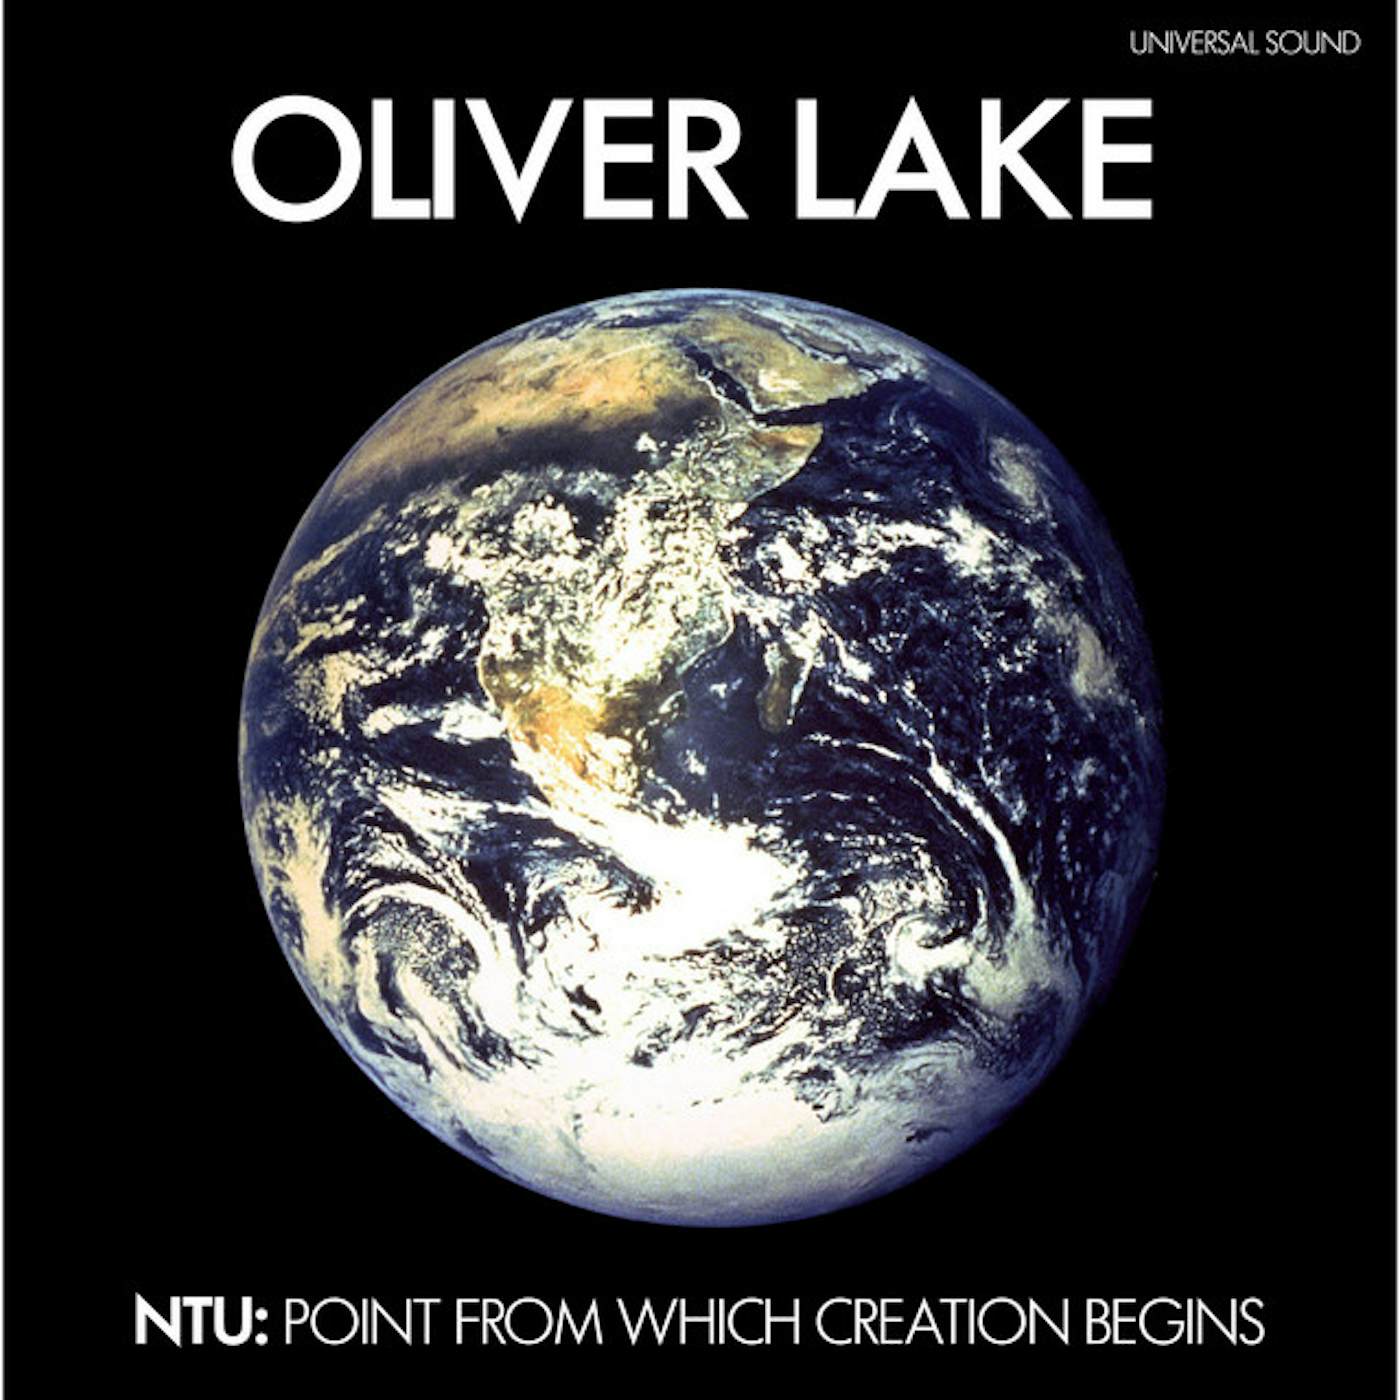 Oliver Lake NTU: THE POINT FROM WHICH CREATION BEGINS CD